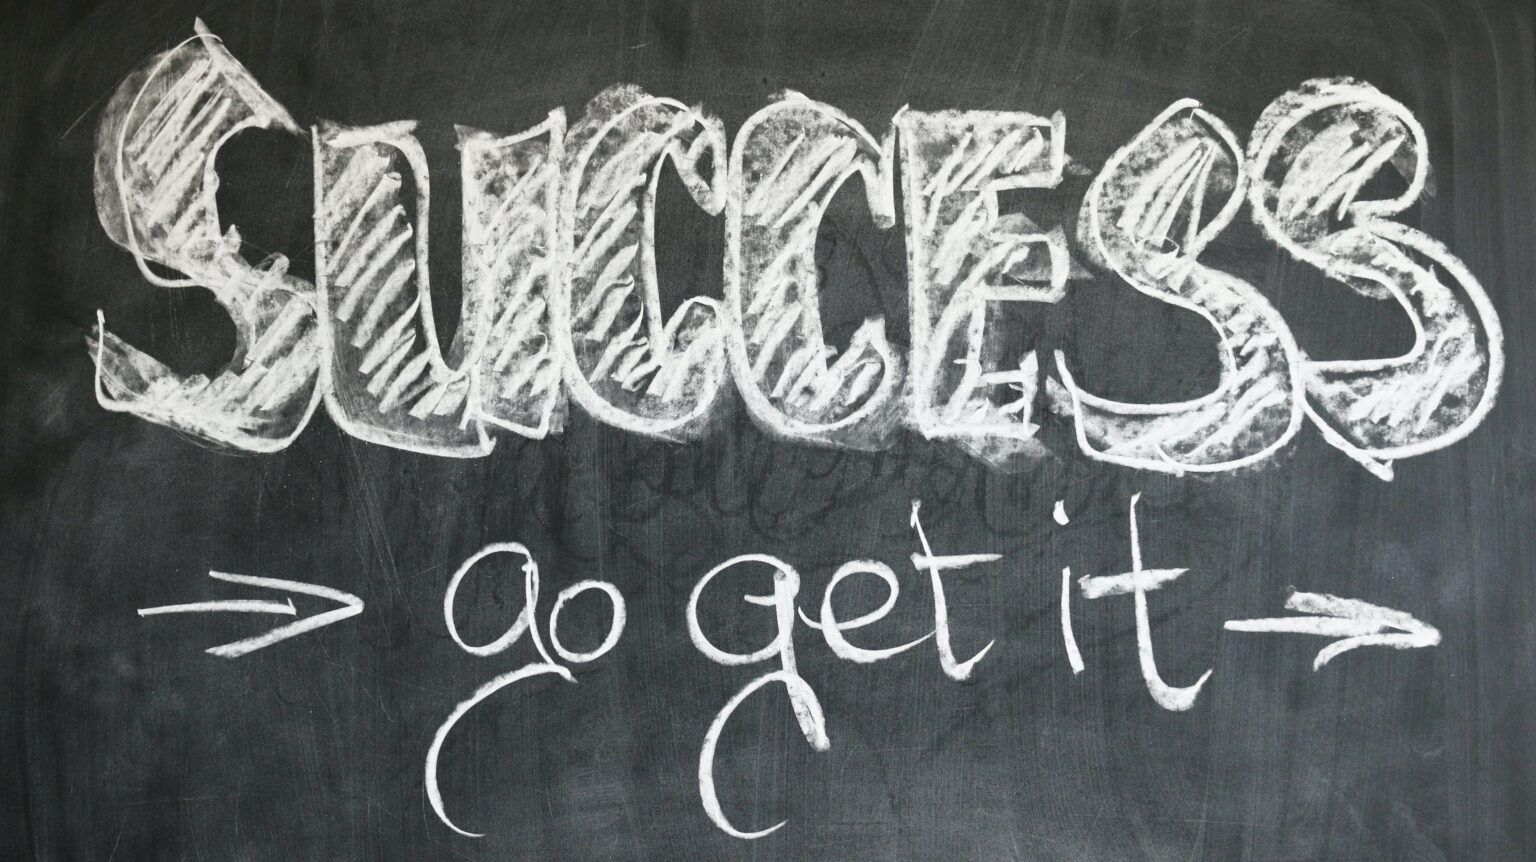 the phrase sucess on a blackboard with chalk